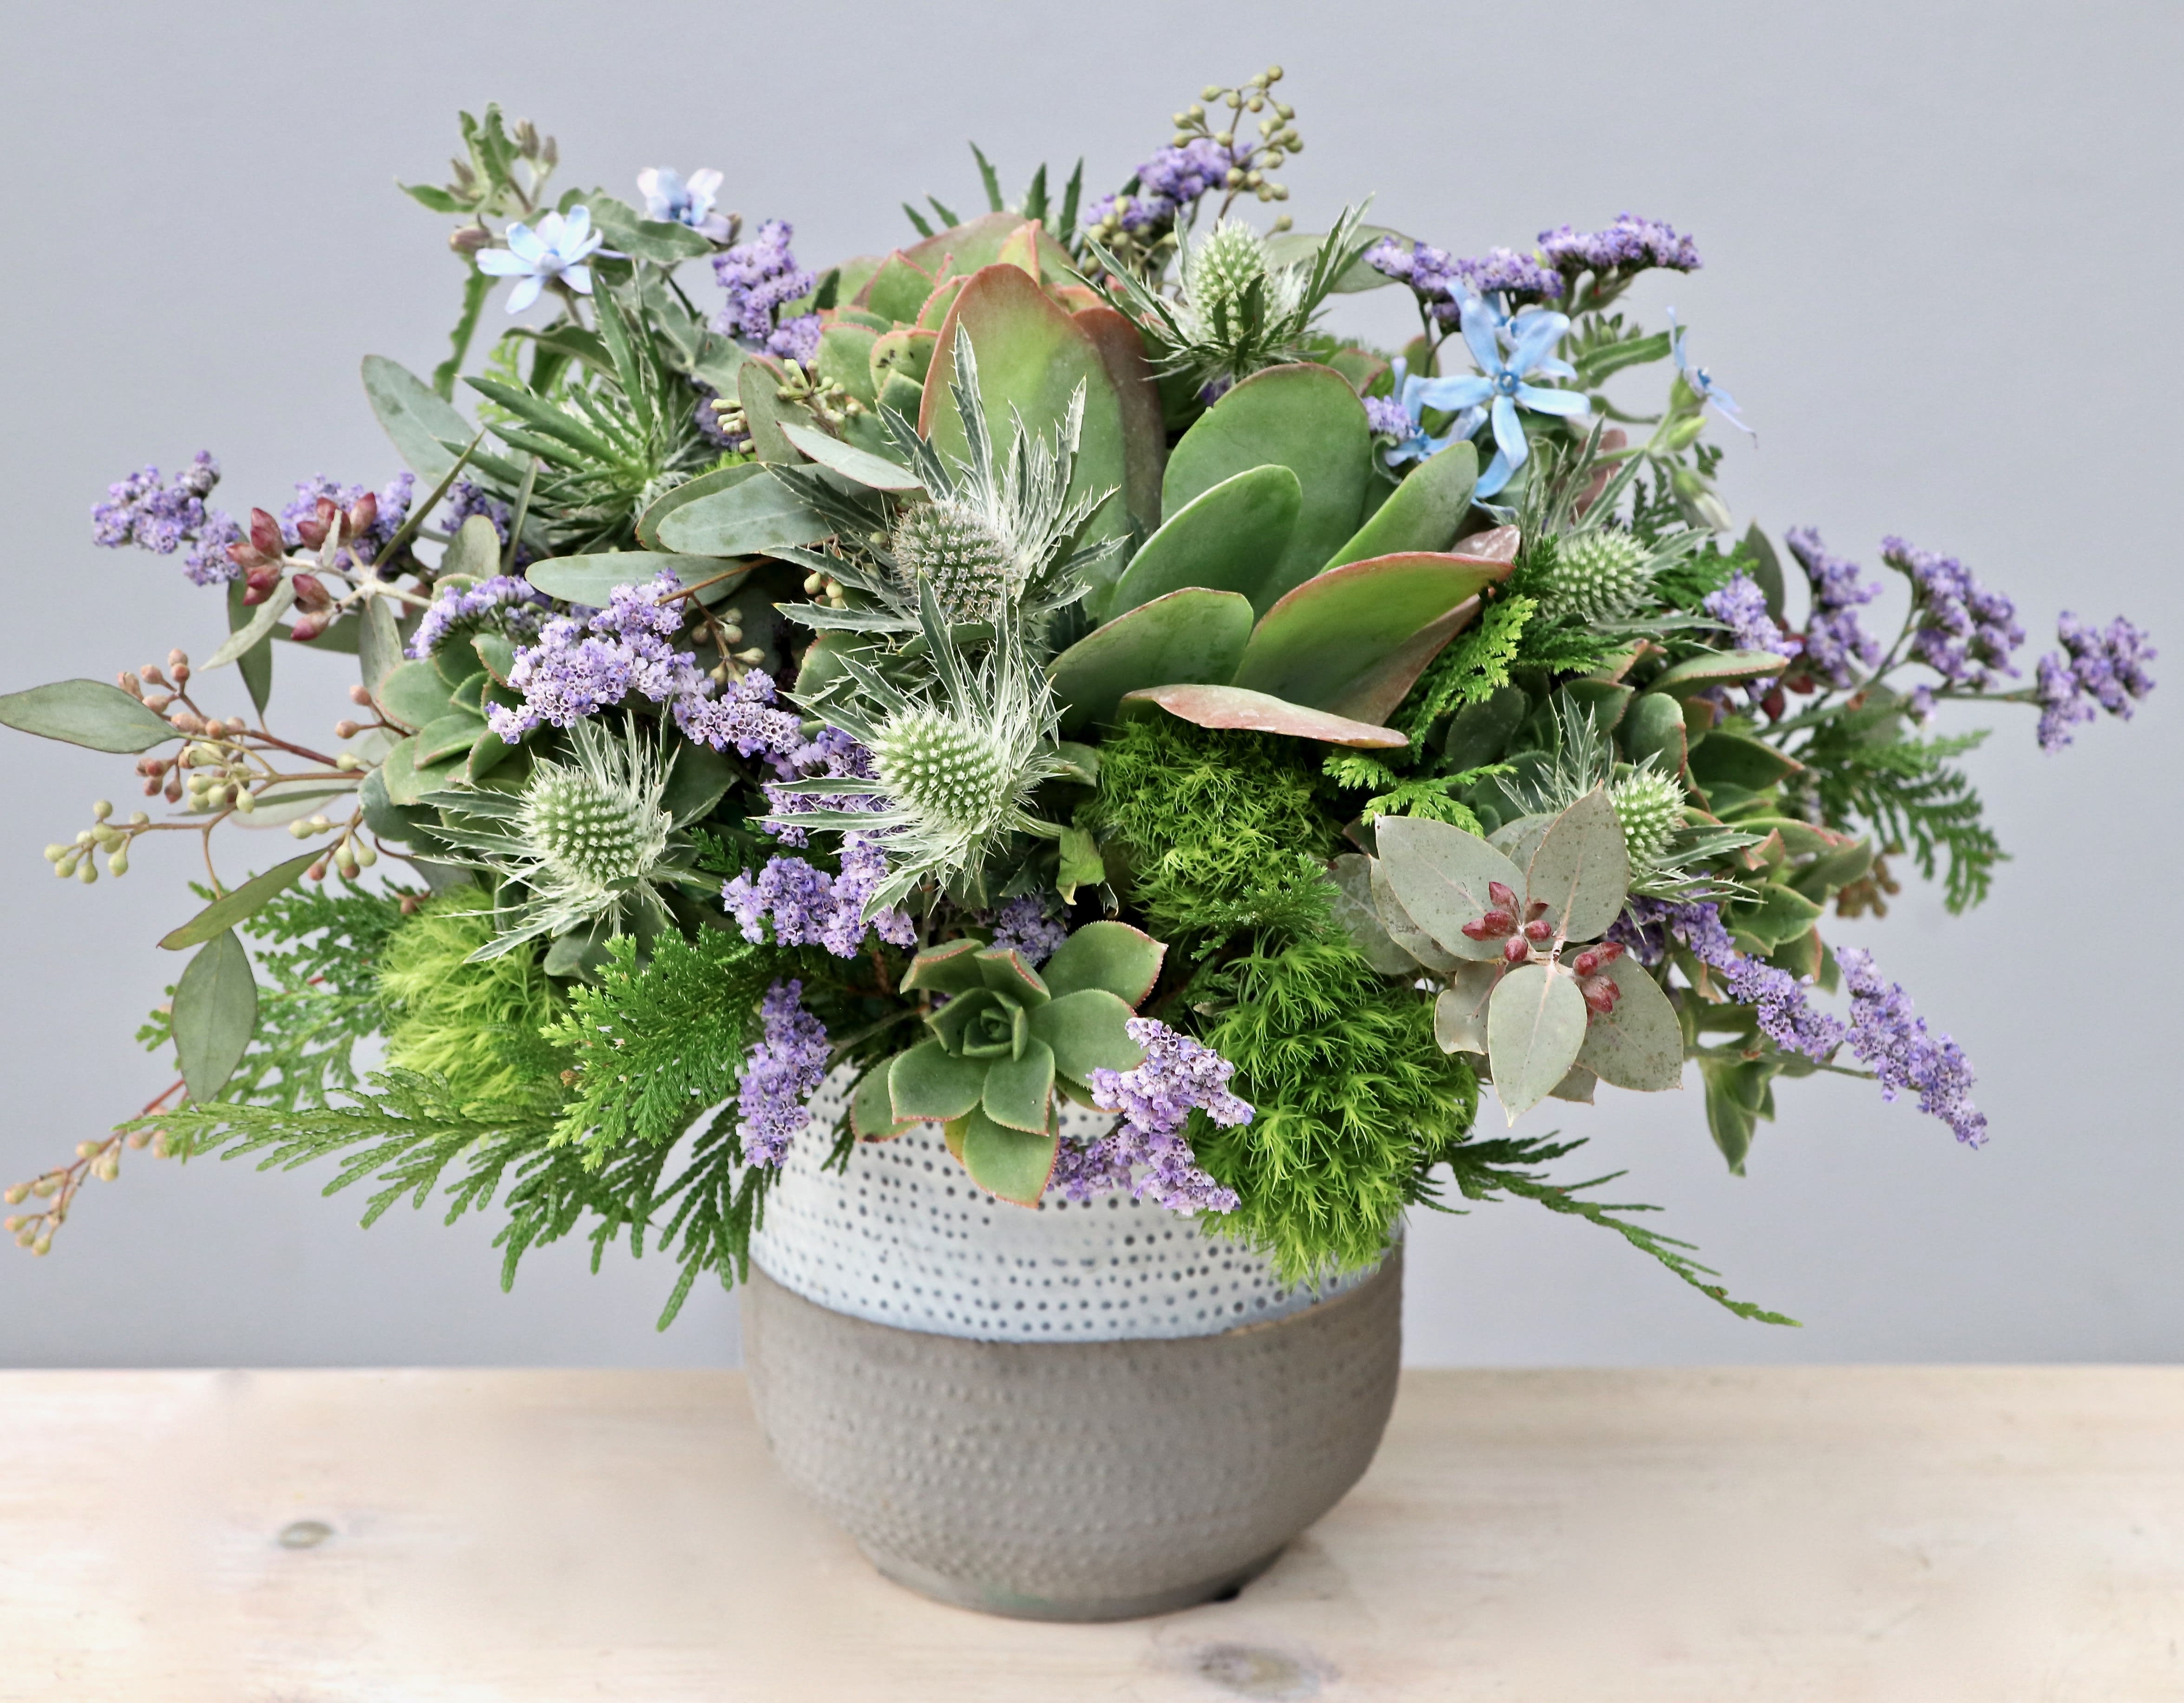 Forget Me Not - My Glendale Florist - With a mix of succulents, seasonal greens, and a sparkly vase, you're bound to make an impression this holiday season.   Standing about 10&quot; high, this arrangement makes for a special treat to the office any day!